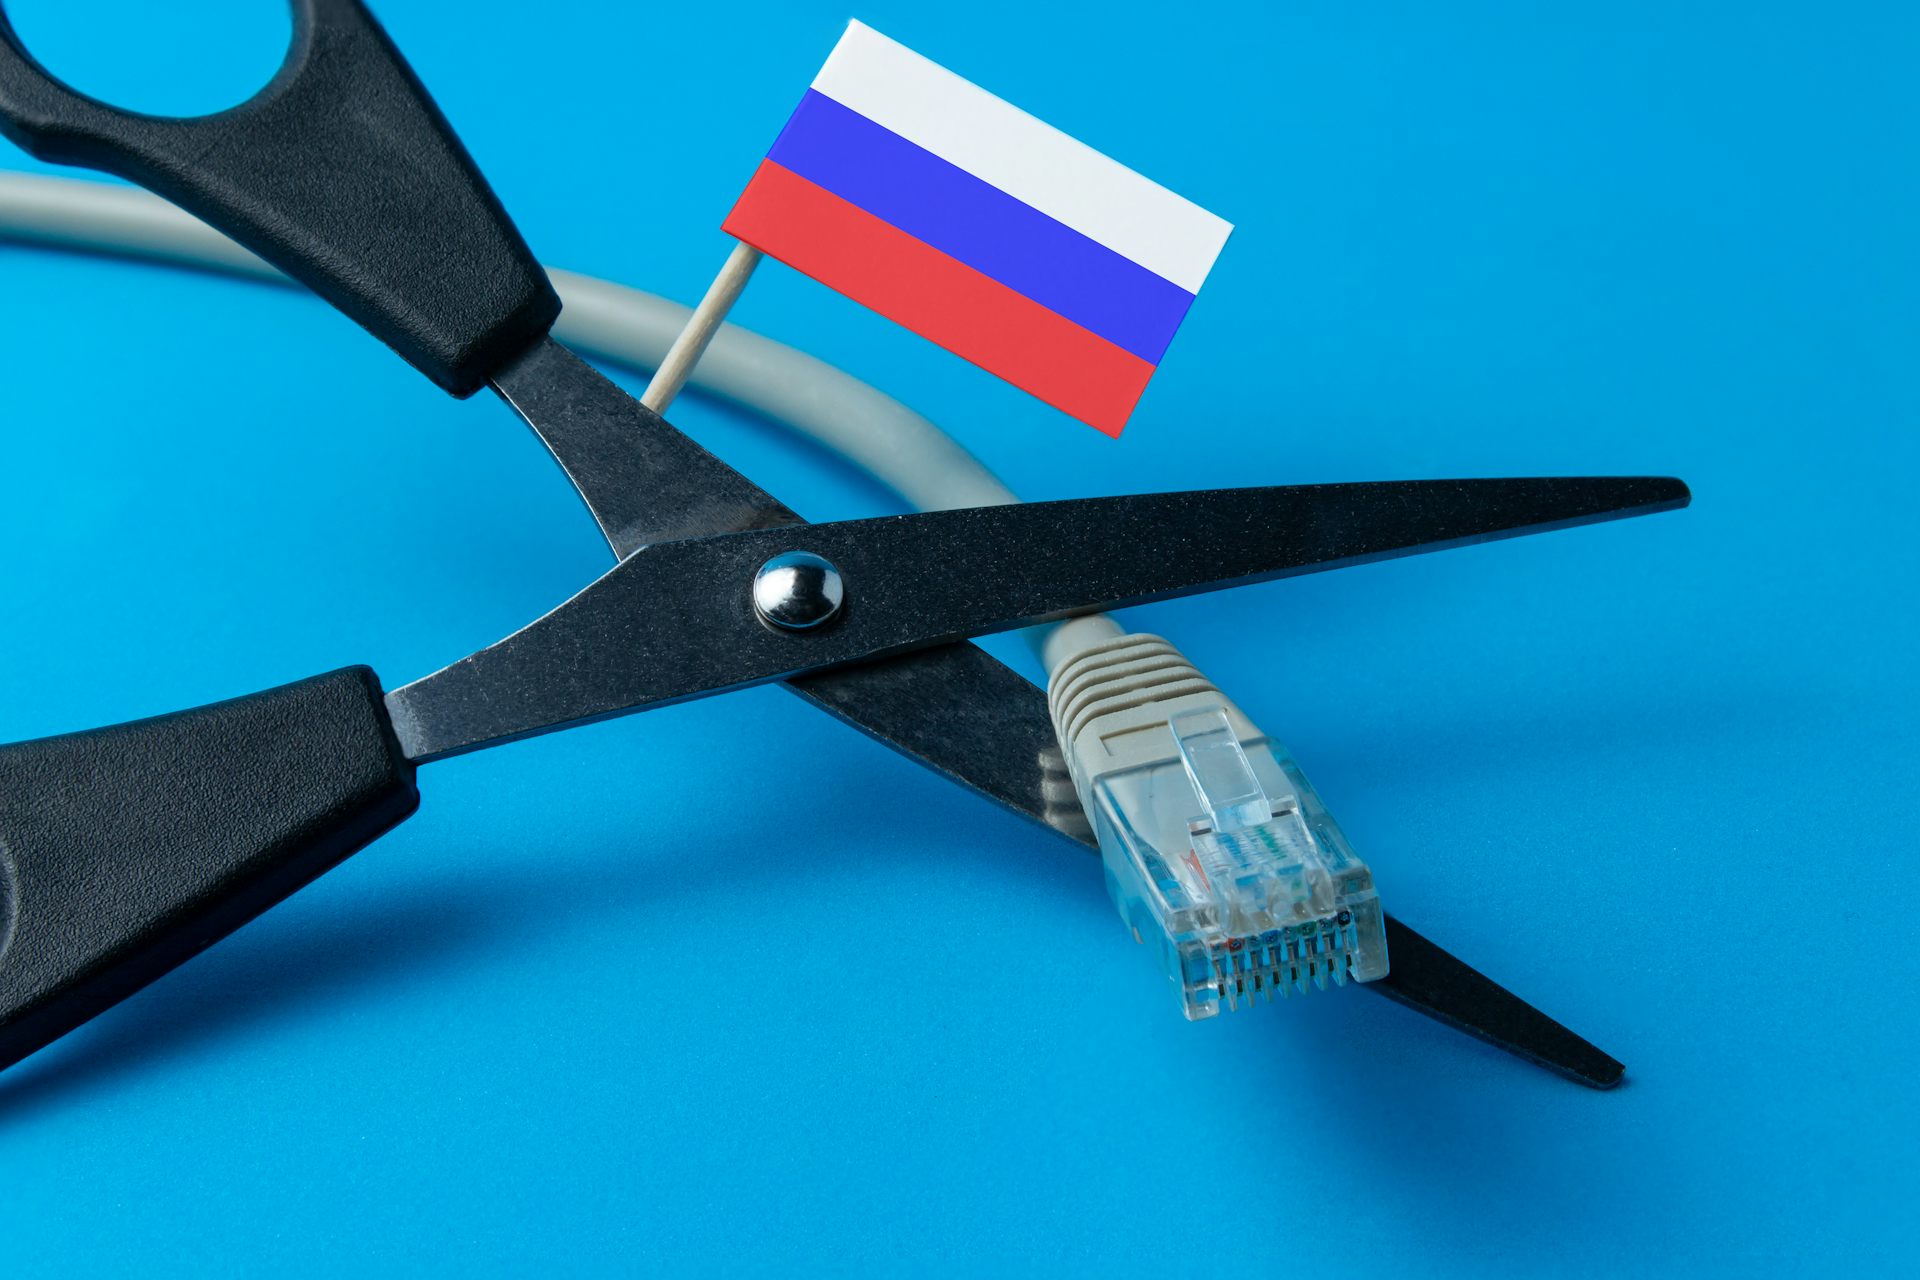 Russia Isn’t the First Country to Protest Western Control Over Global Telecommunications